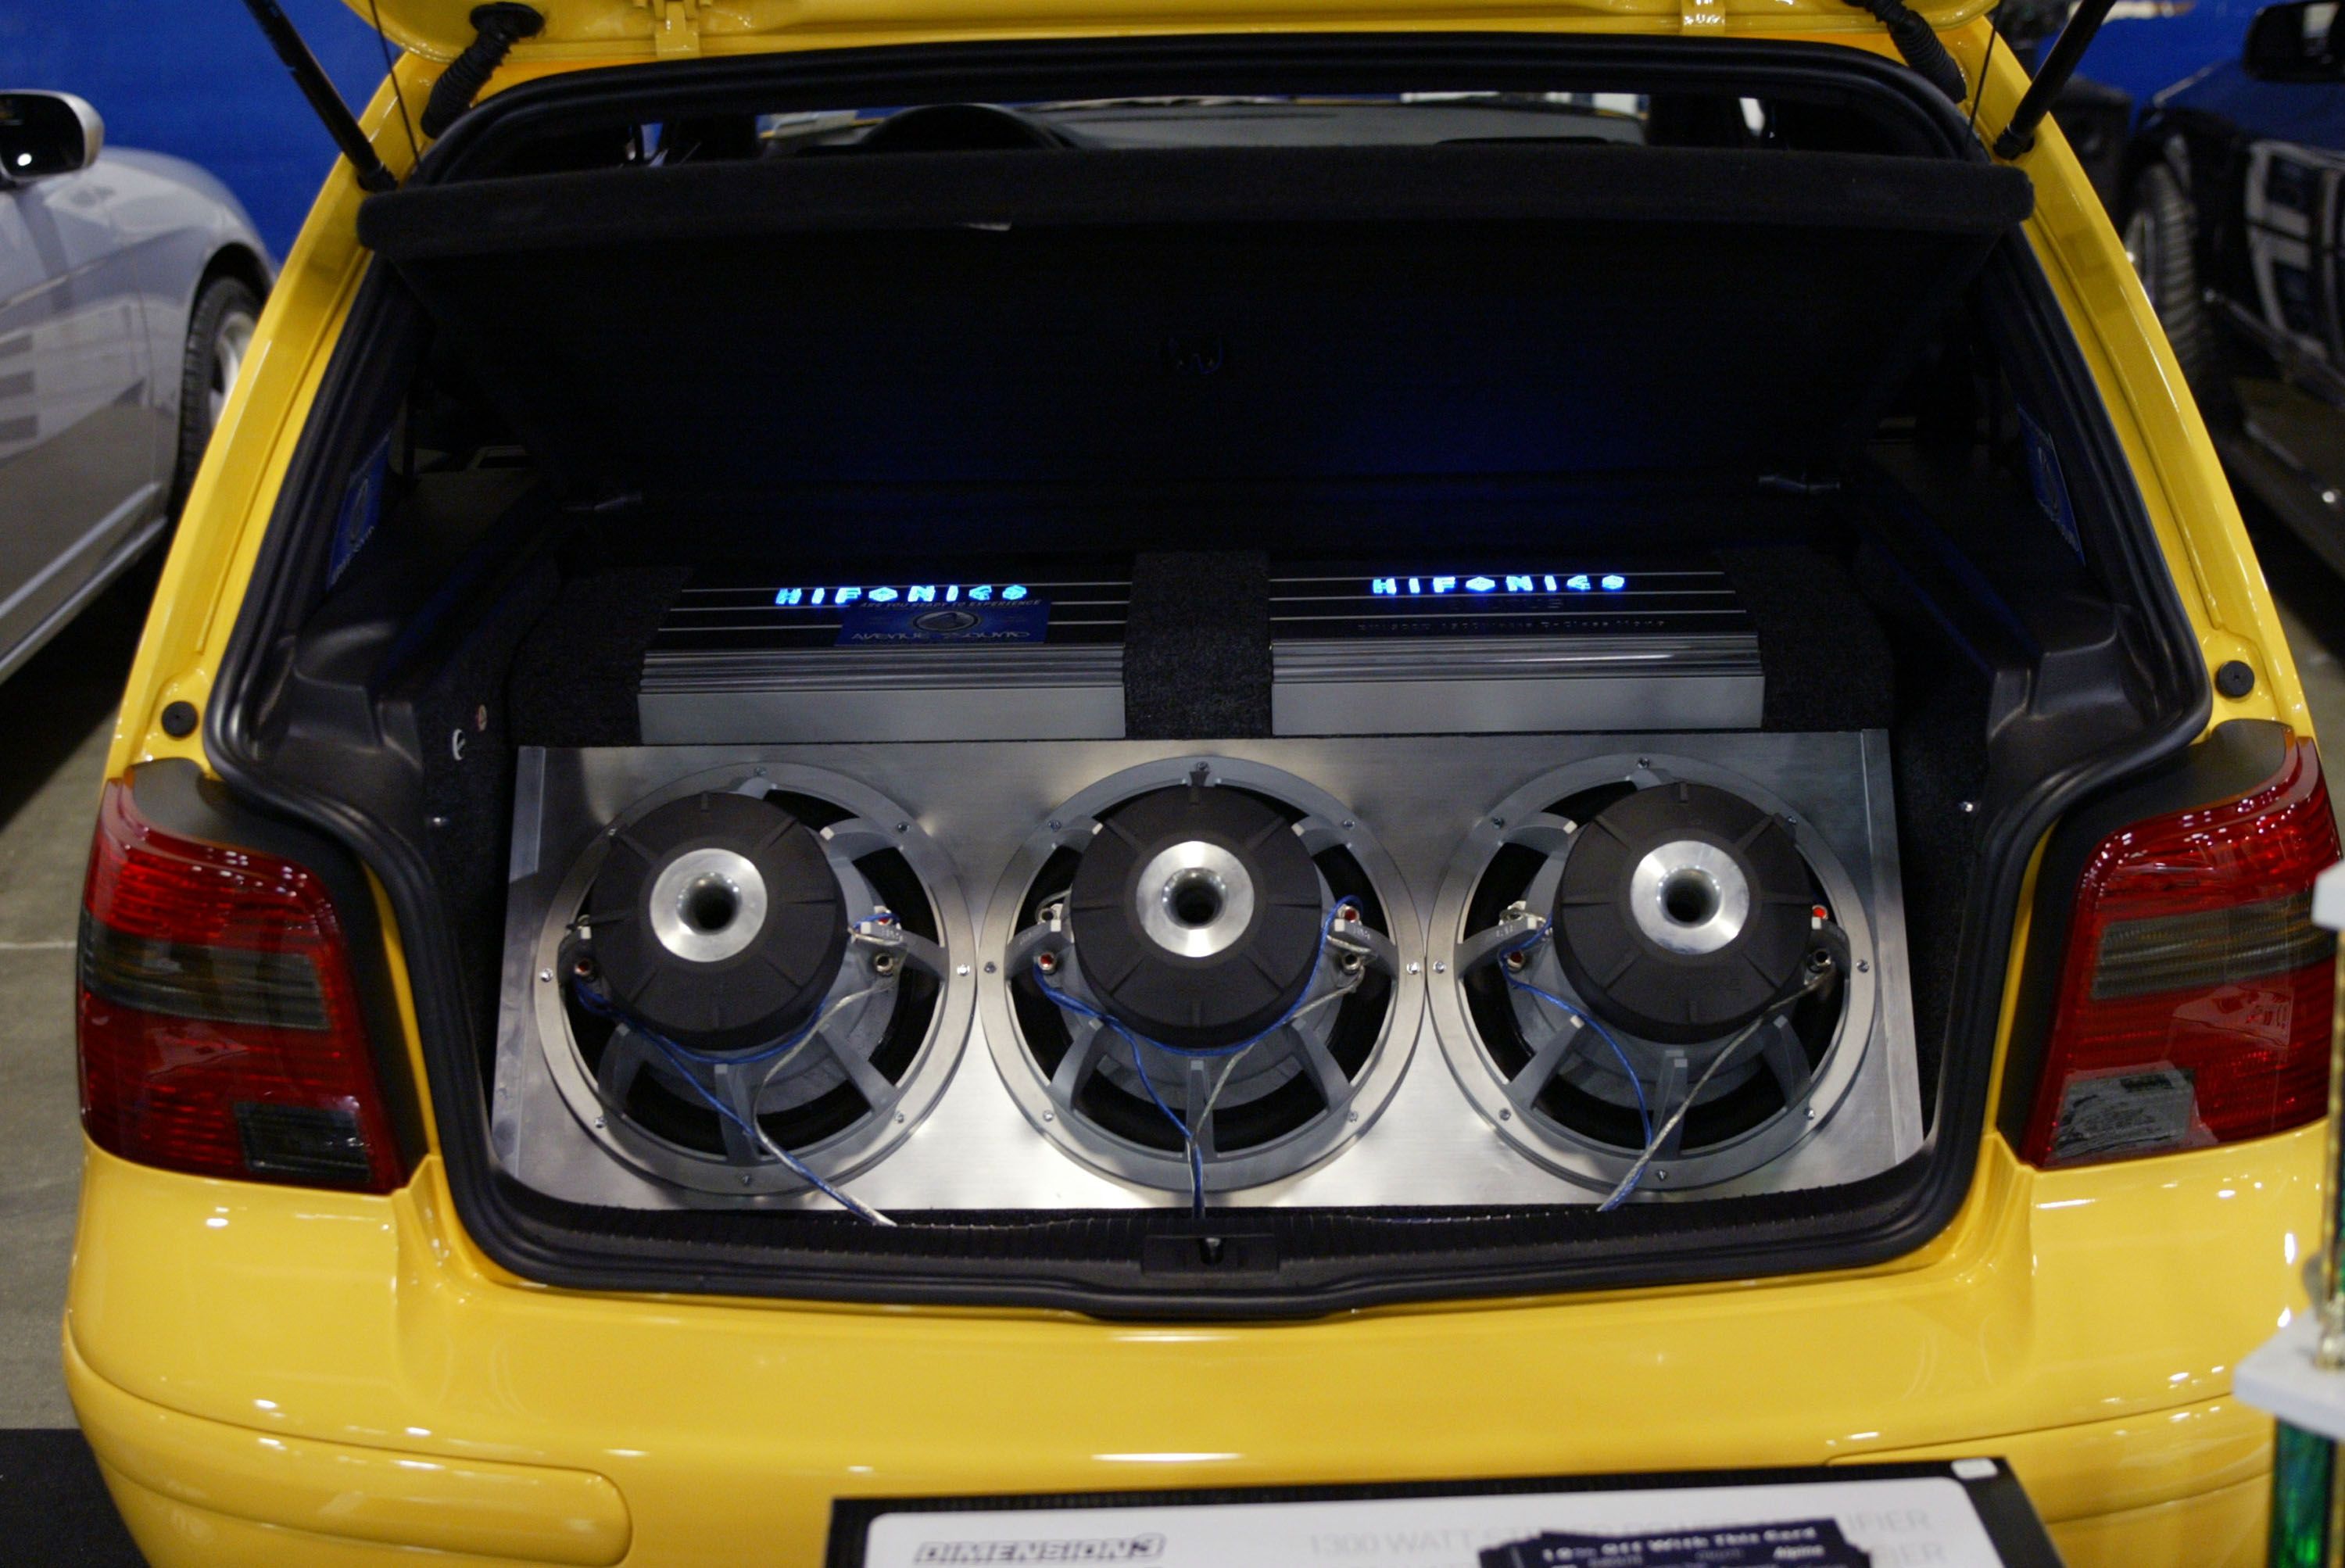 Subwoofers for car